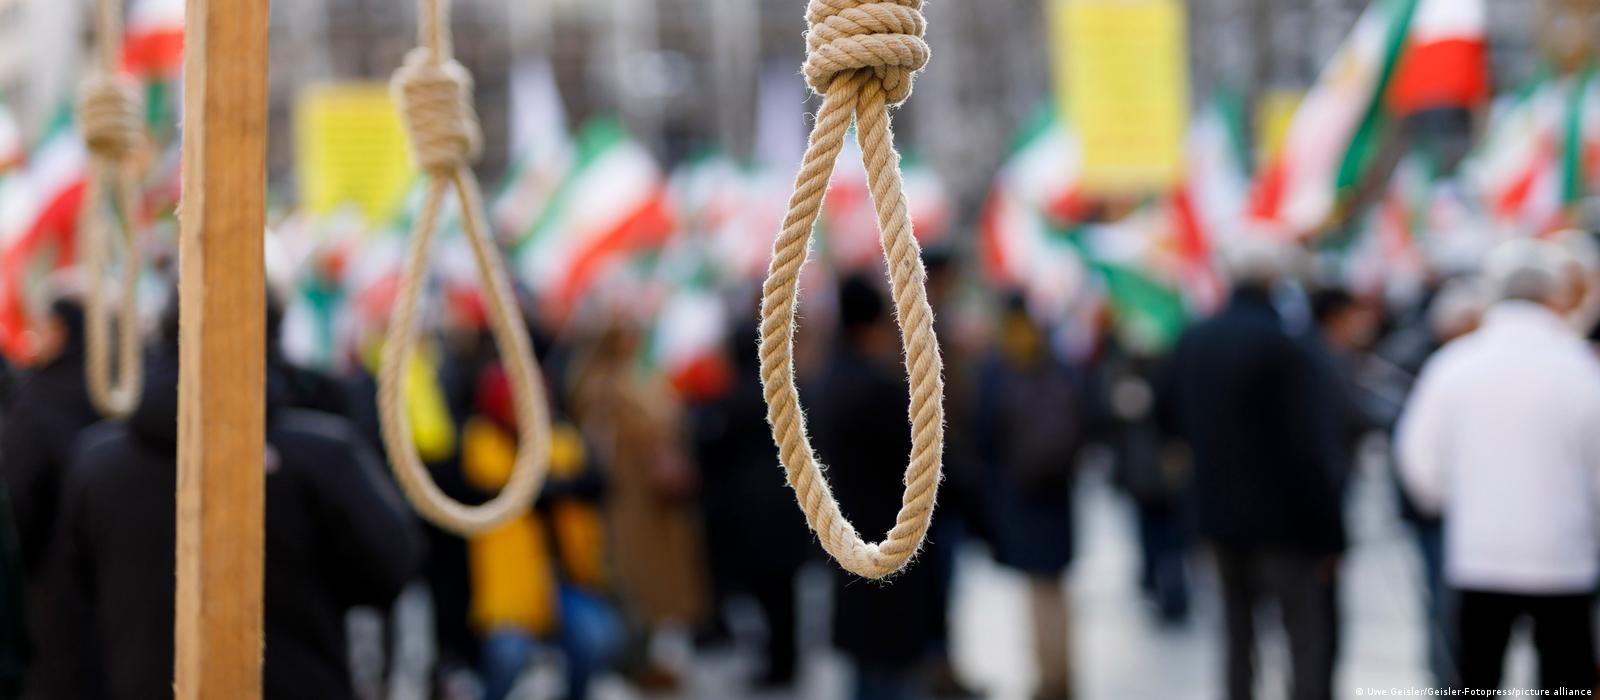 Iran hangs two more men in connection with nationwide protests